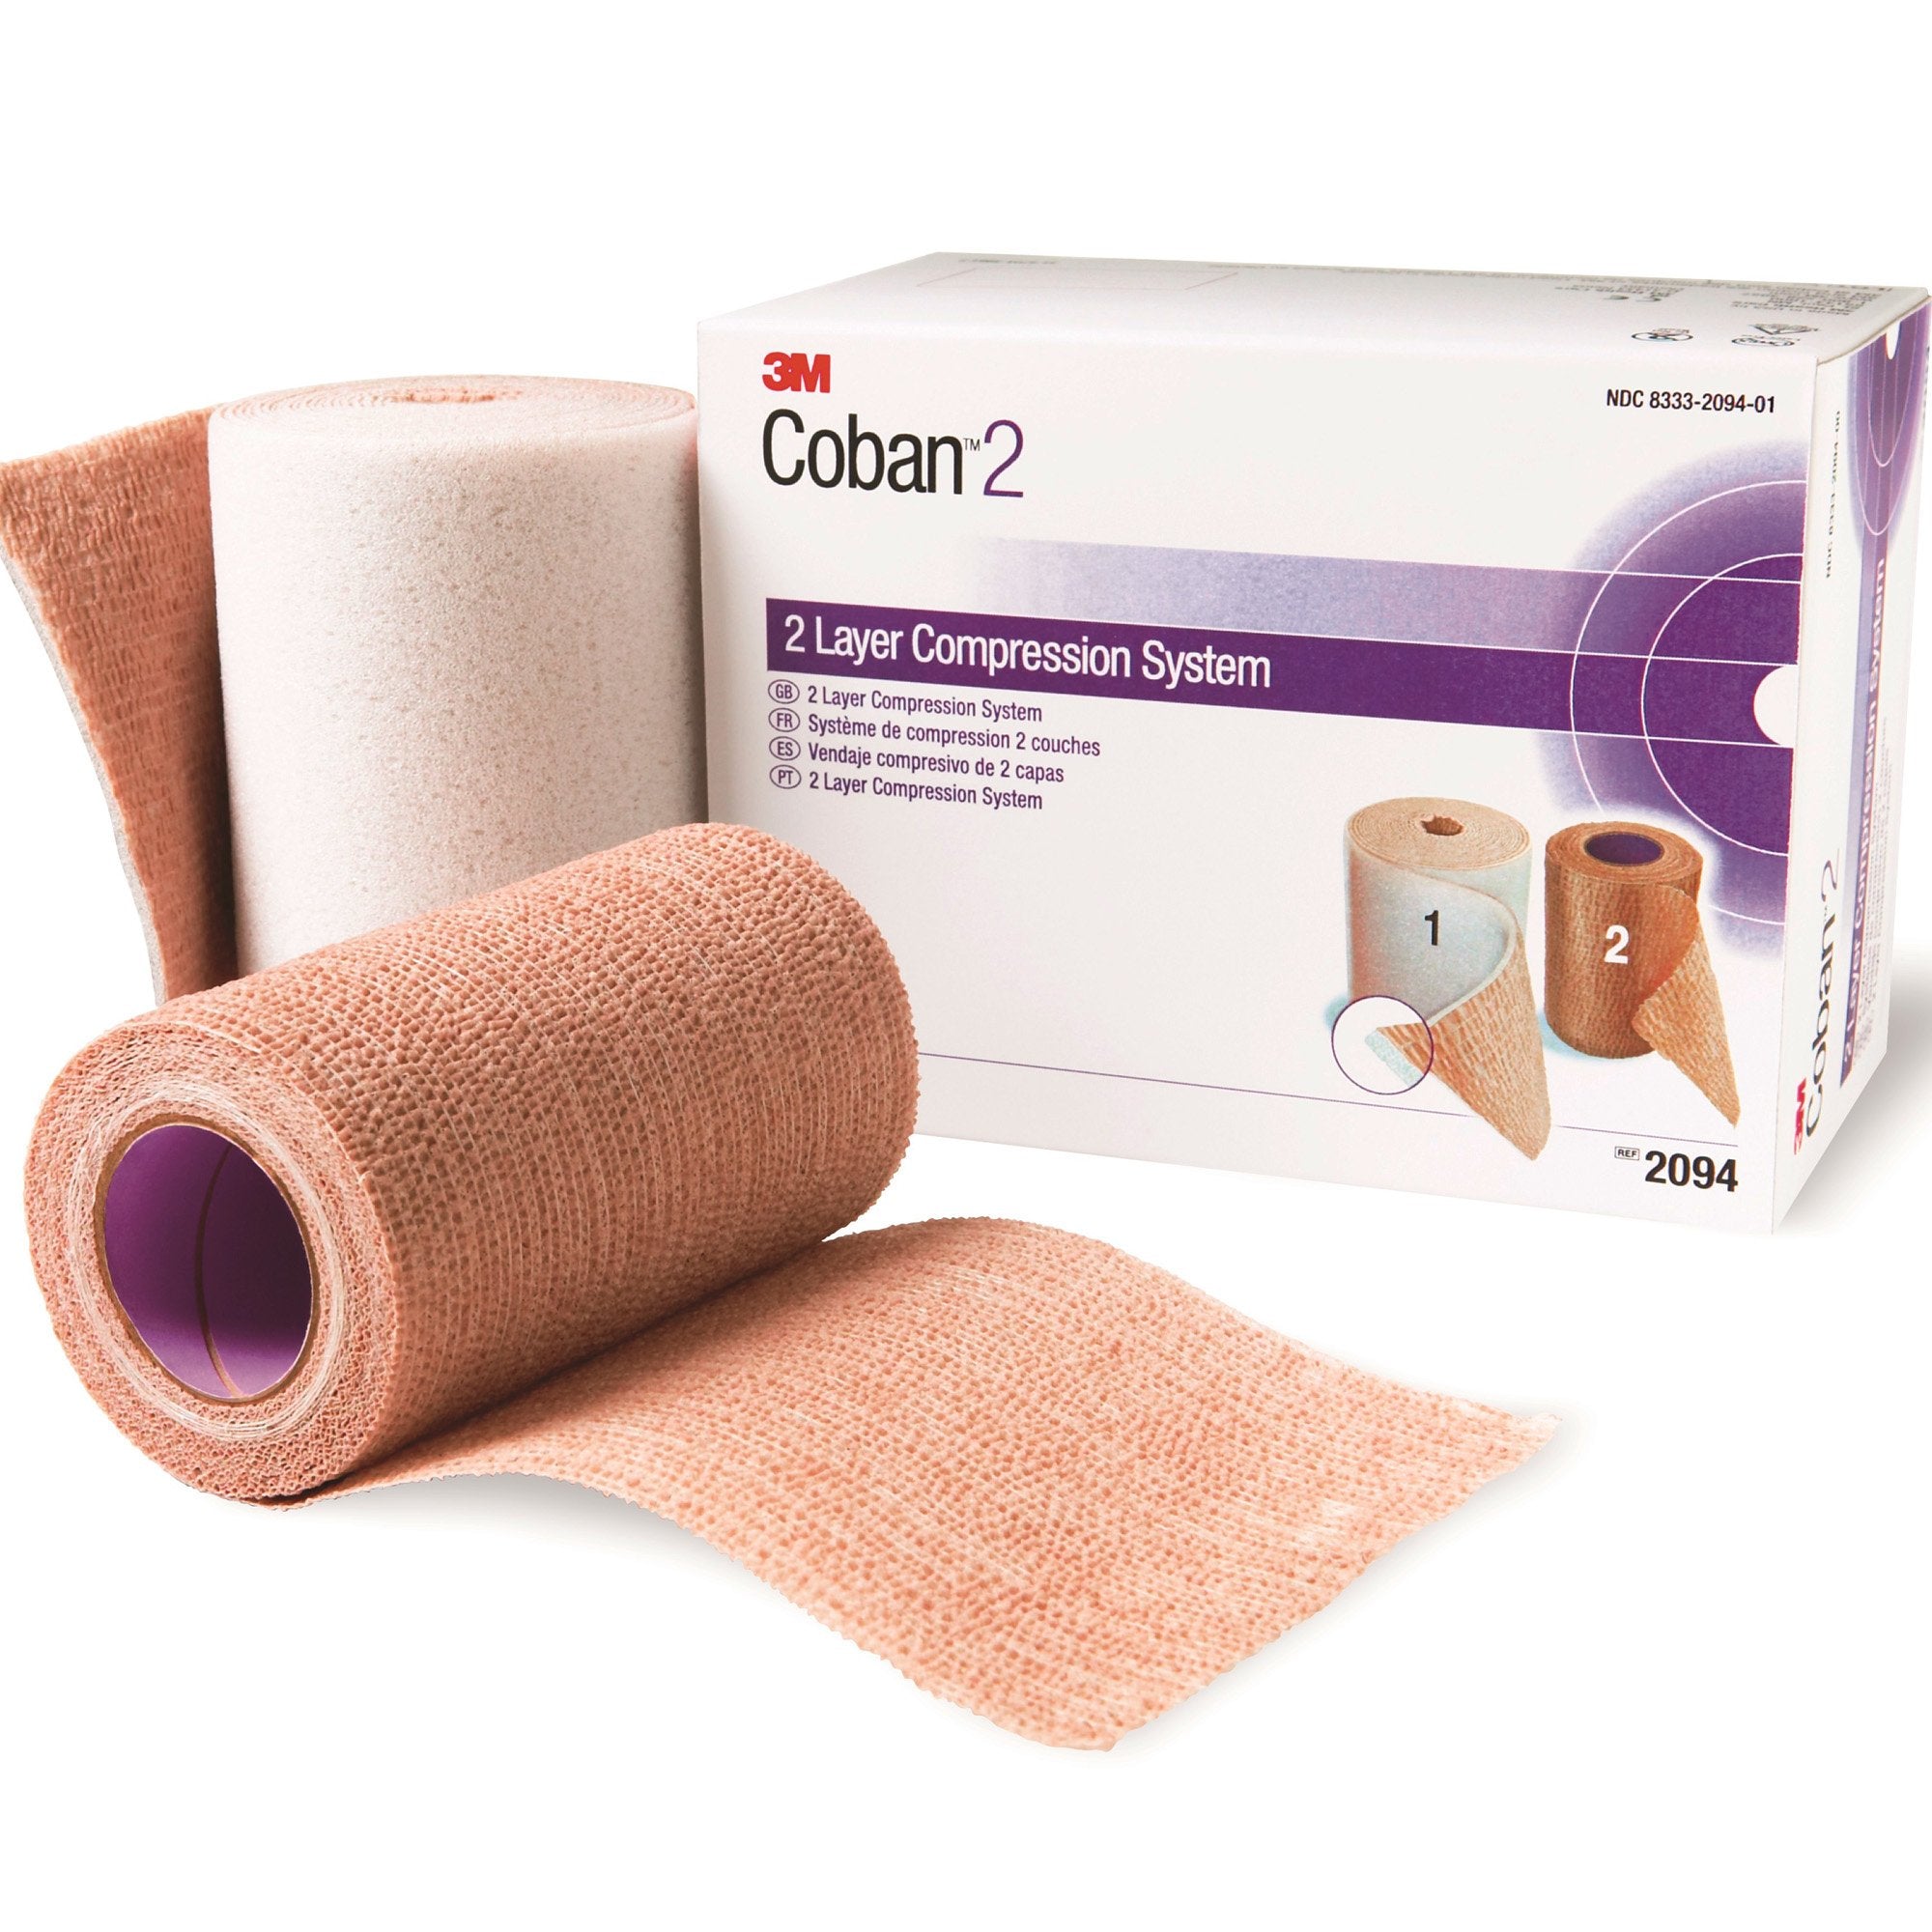 2 Layer Compression Bandage System 3M Coban 2 2-9/10 Yard X 4 Inch / 4 Inch X 5-1/10 Yard 35 to 40 mmHg Self-adherent / Pull On Closure Tan / White NonSterile